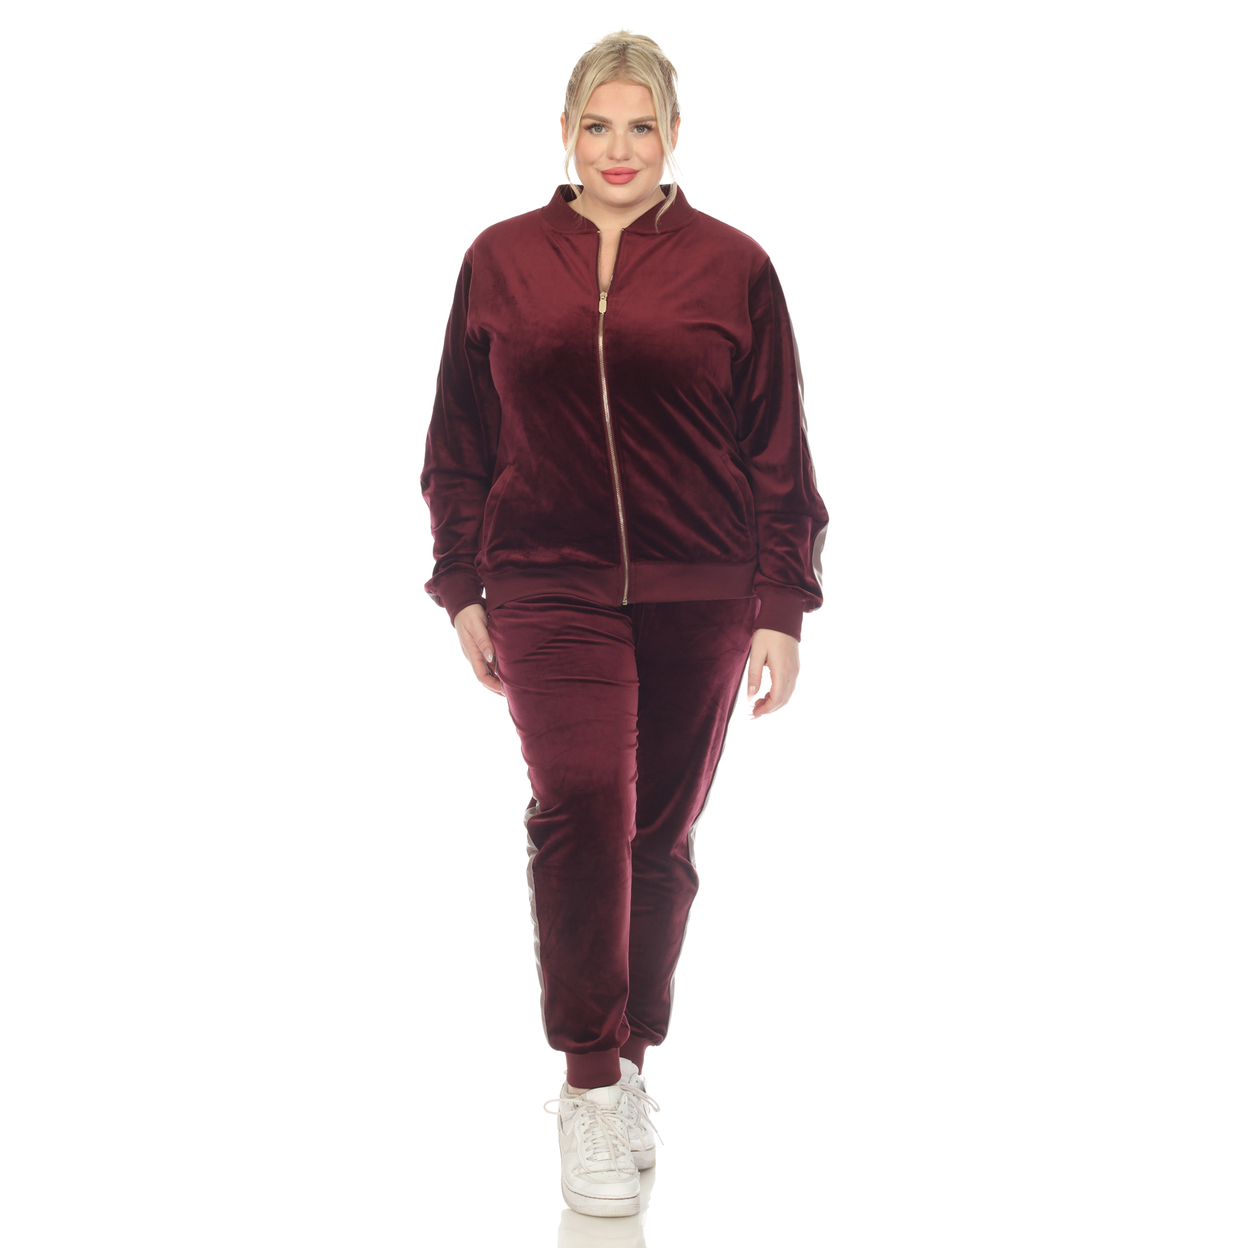 White Mark Women's 2-Piece Velour Tracksuit Set With Faux Leather Stripe - Burgundy, 2x